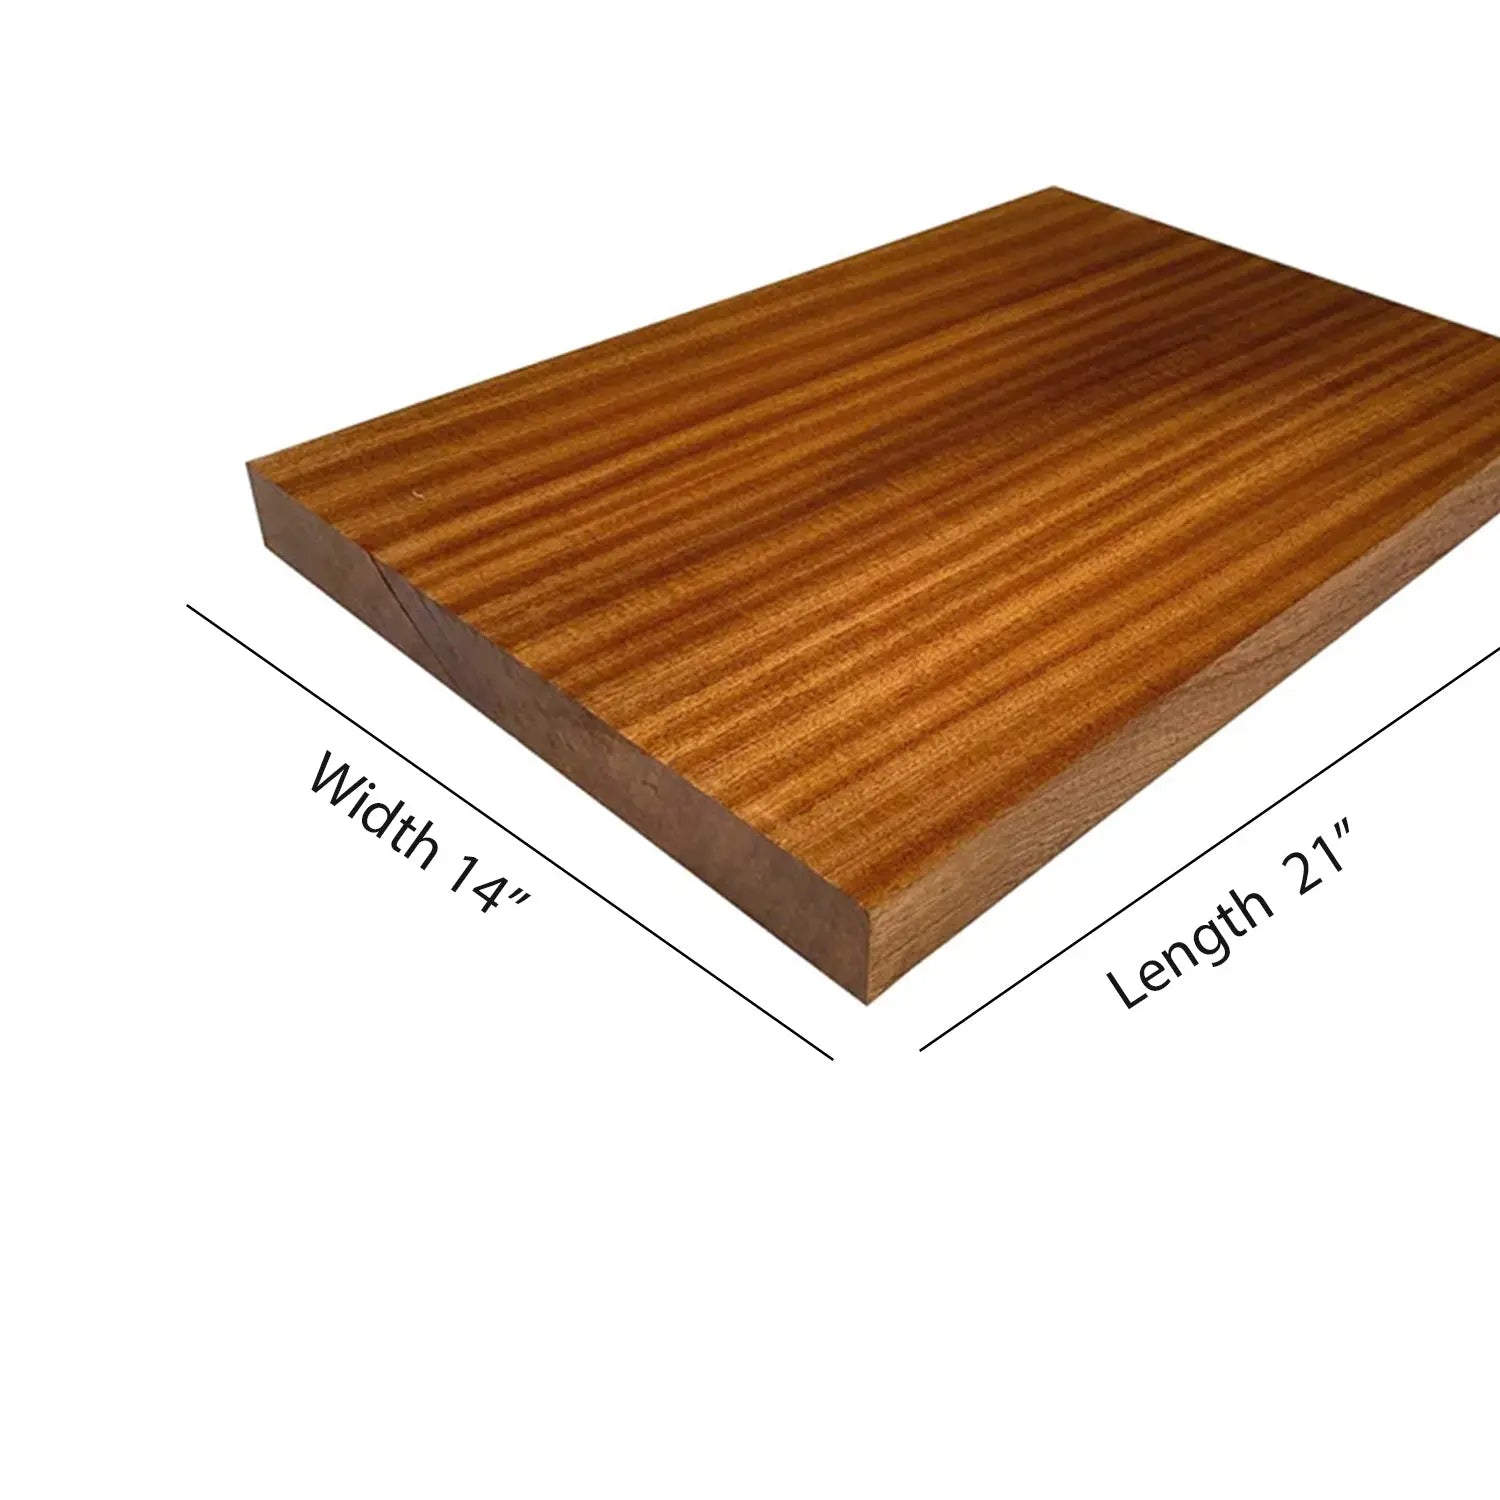 Premium Solid Cherry Wood Sheets, Sustainably Sourced, Sanded, and Planed